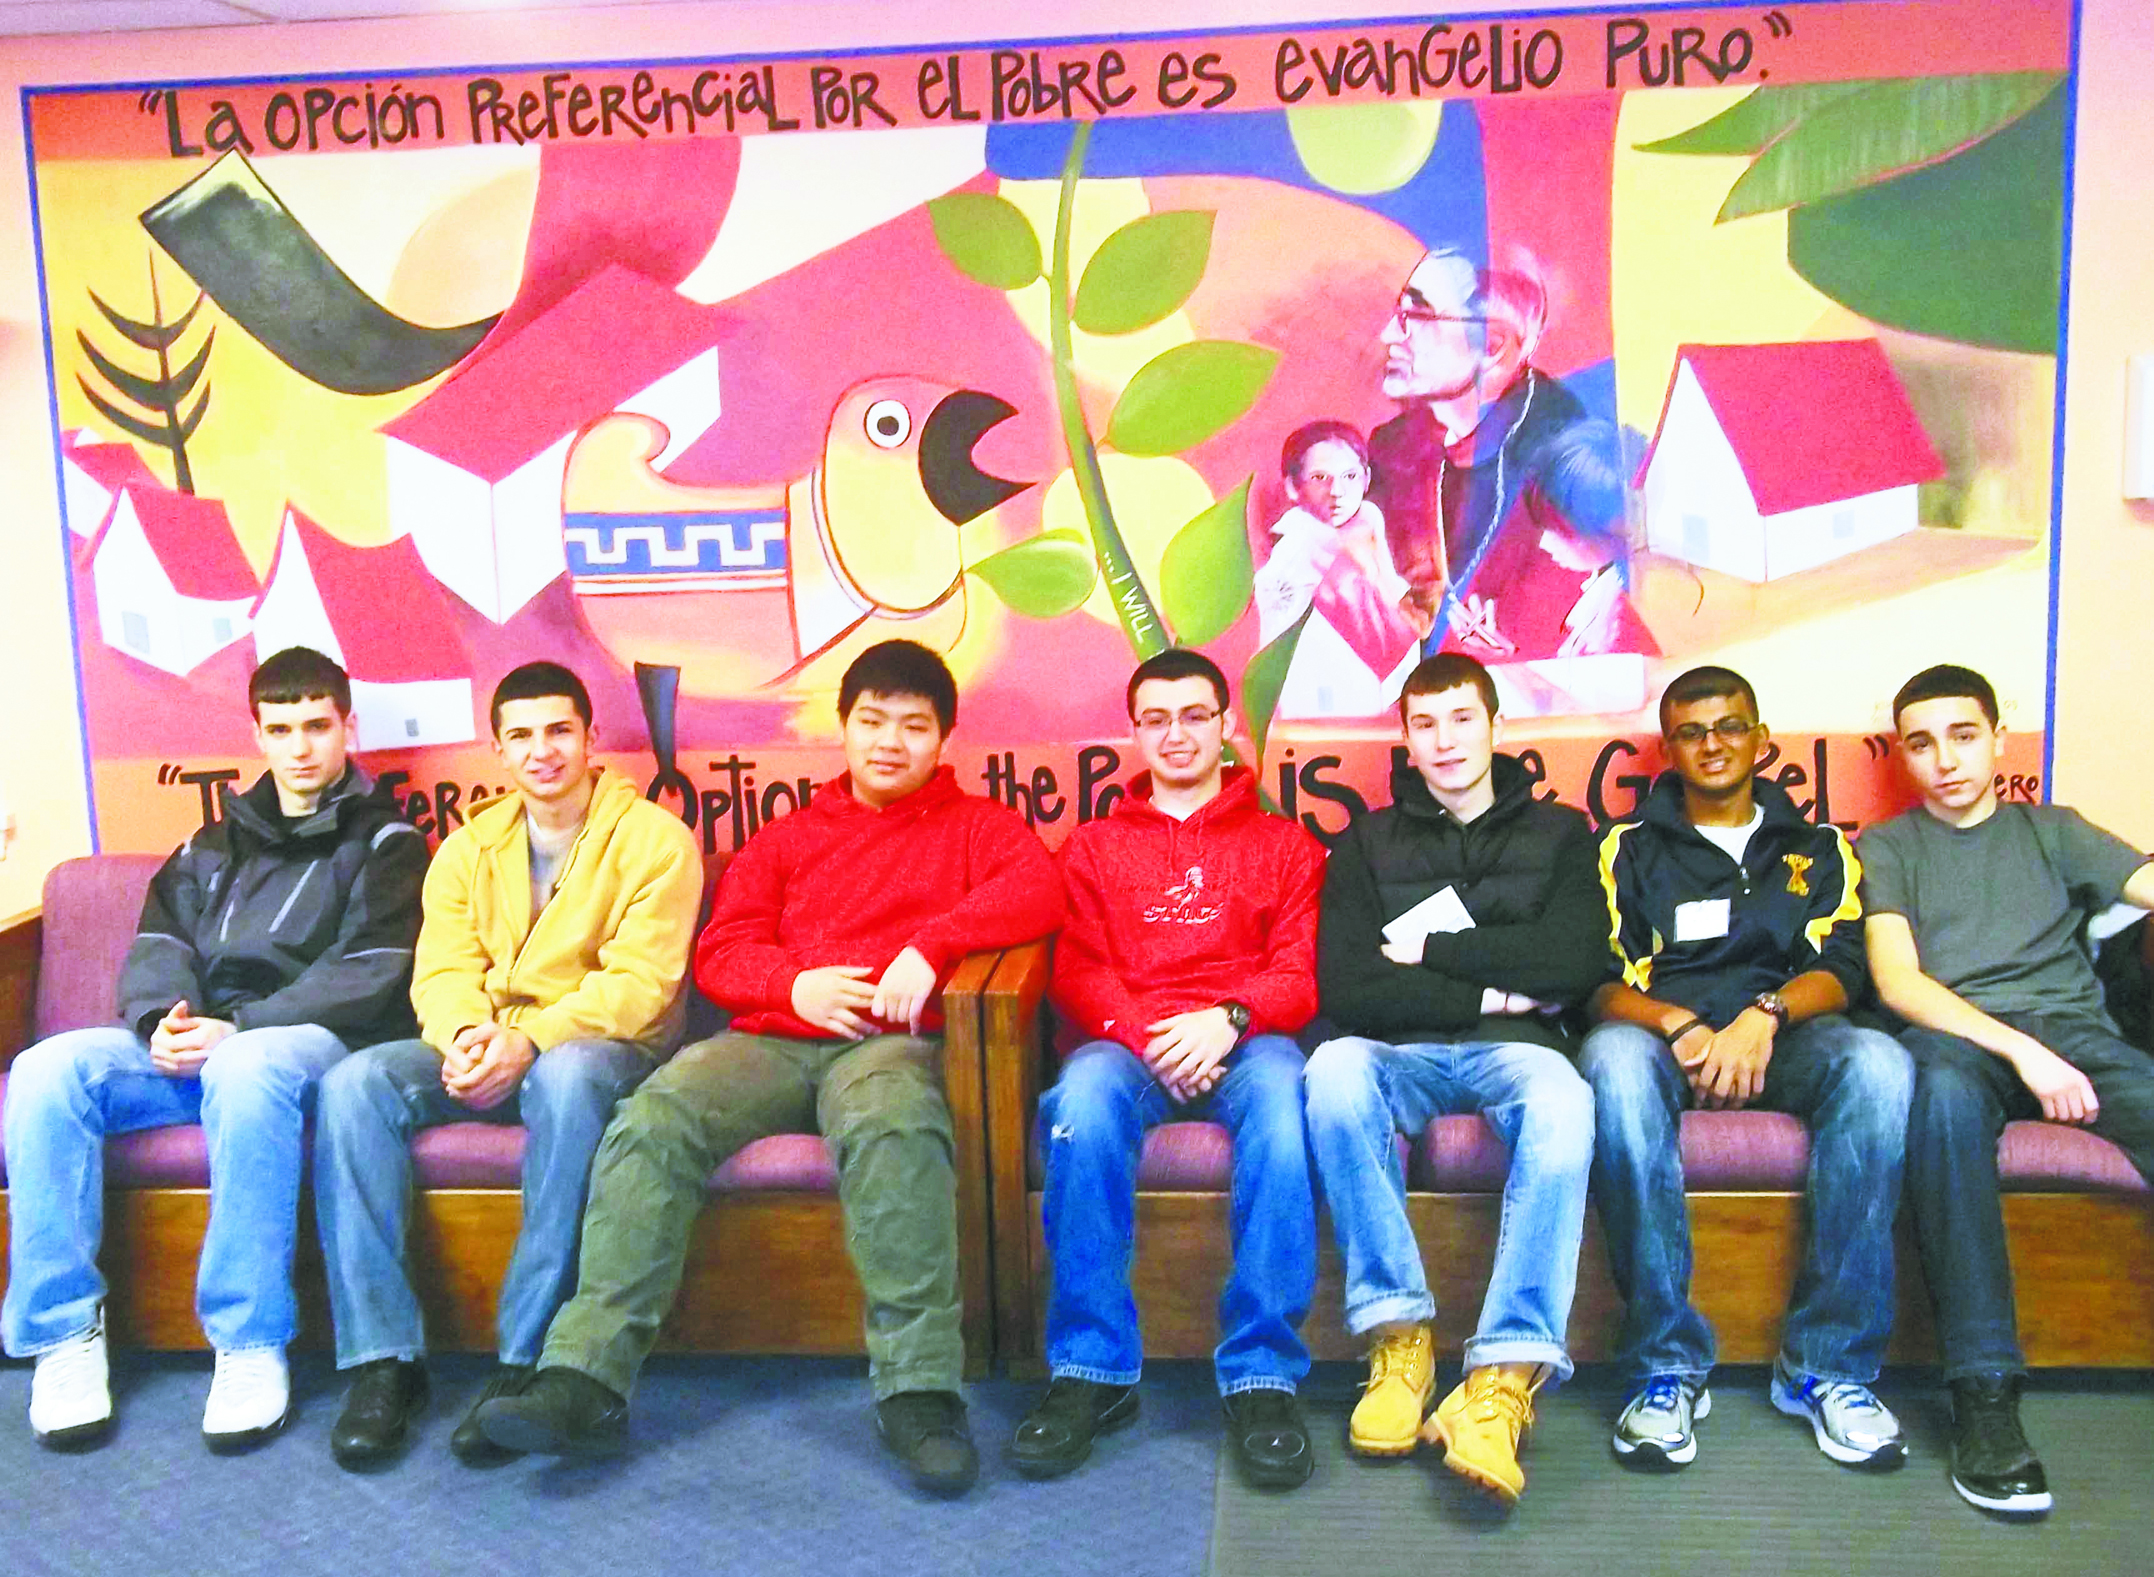 Seven students from Xavarian H.S., Bay Ridge, followed the example of the apostles and left their comfort zone to follow in Jesus’ footsteps by participating in the Urban Challenge in Camden N.J. They are pictured from left to right: Wiktor Rzeszutko, junior; Andrew Schillaci, senior; Justin Chung, junior; Kyle O’Halloran, senior; Jacob Loff, junior; Raj Patel, senior; and Massimo Ferrigno, senior. They were accompanied by John Dormer, director of campus ministry, and Brendan Moloney, religion department curriculum specialist.